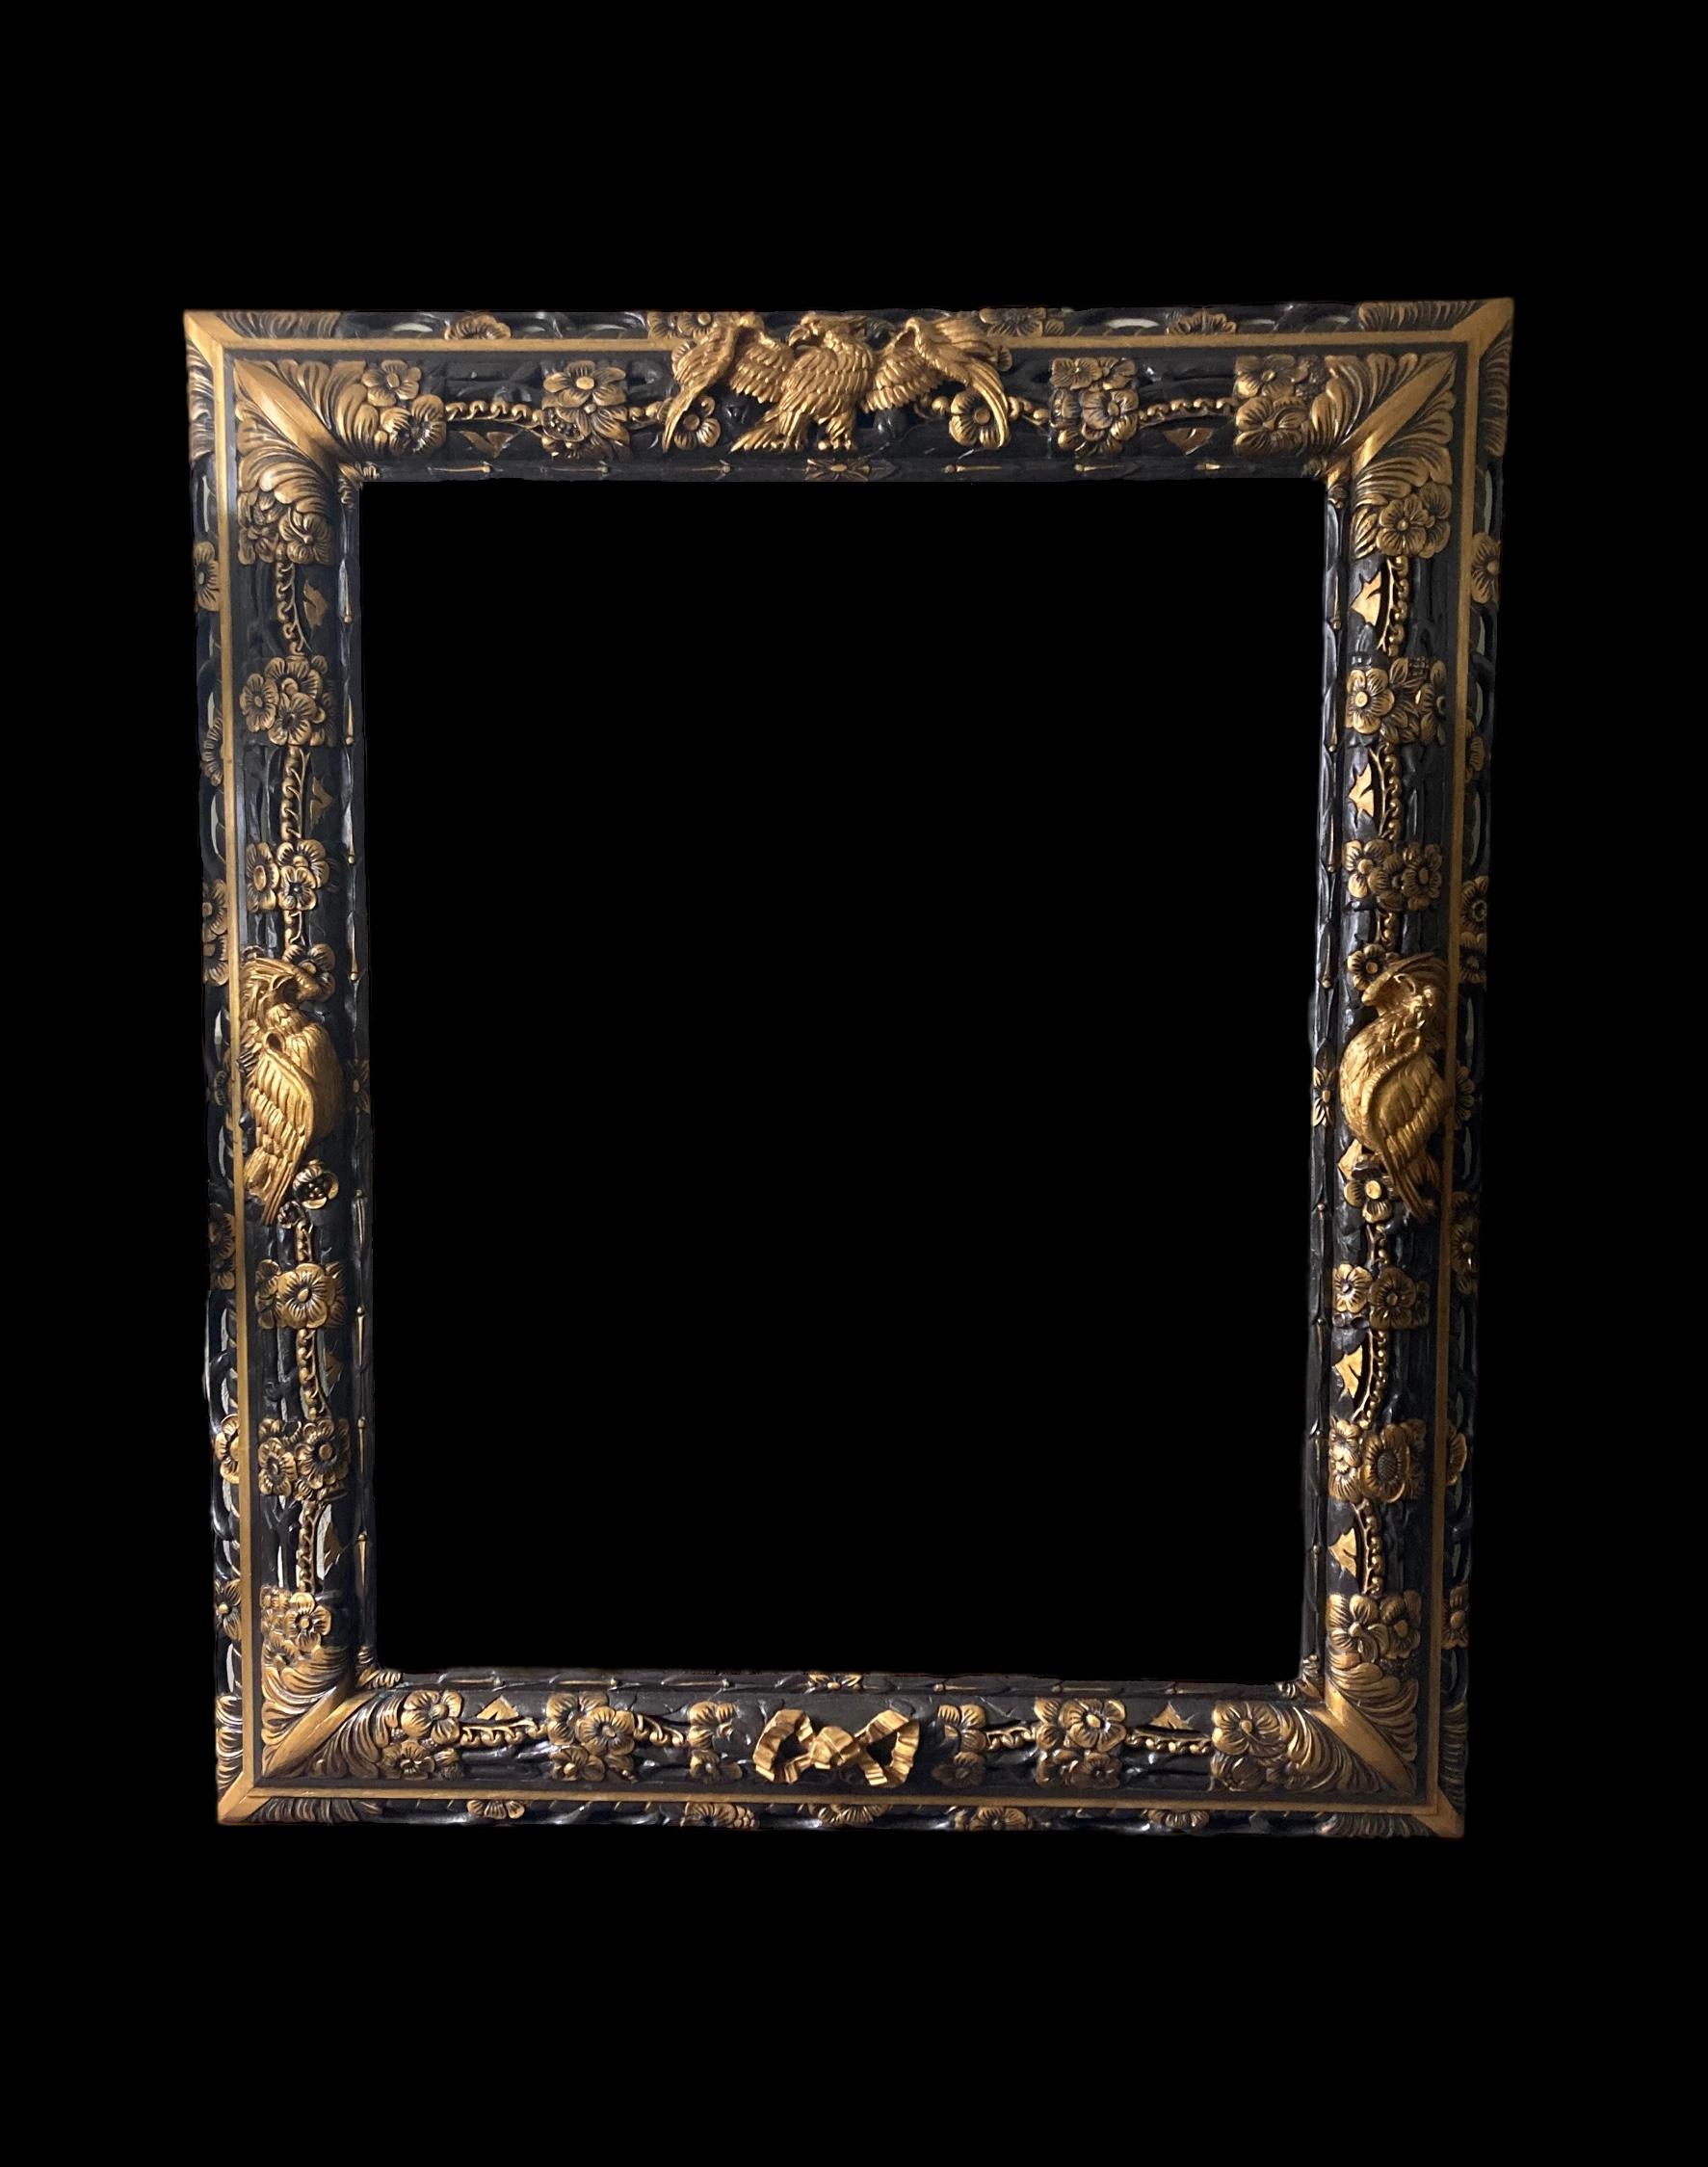 An opulent carved and painted continental wall mirror of large proportions, circa 1890, the mercury plate is surrounded by a deep two tier frame depicting hand painted gilt coloured eagles, fruit, flowers and ribbons accentuated by a rich deep